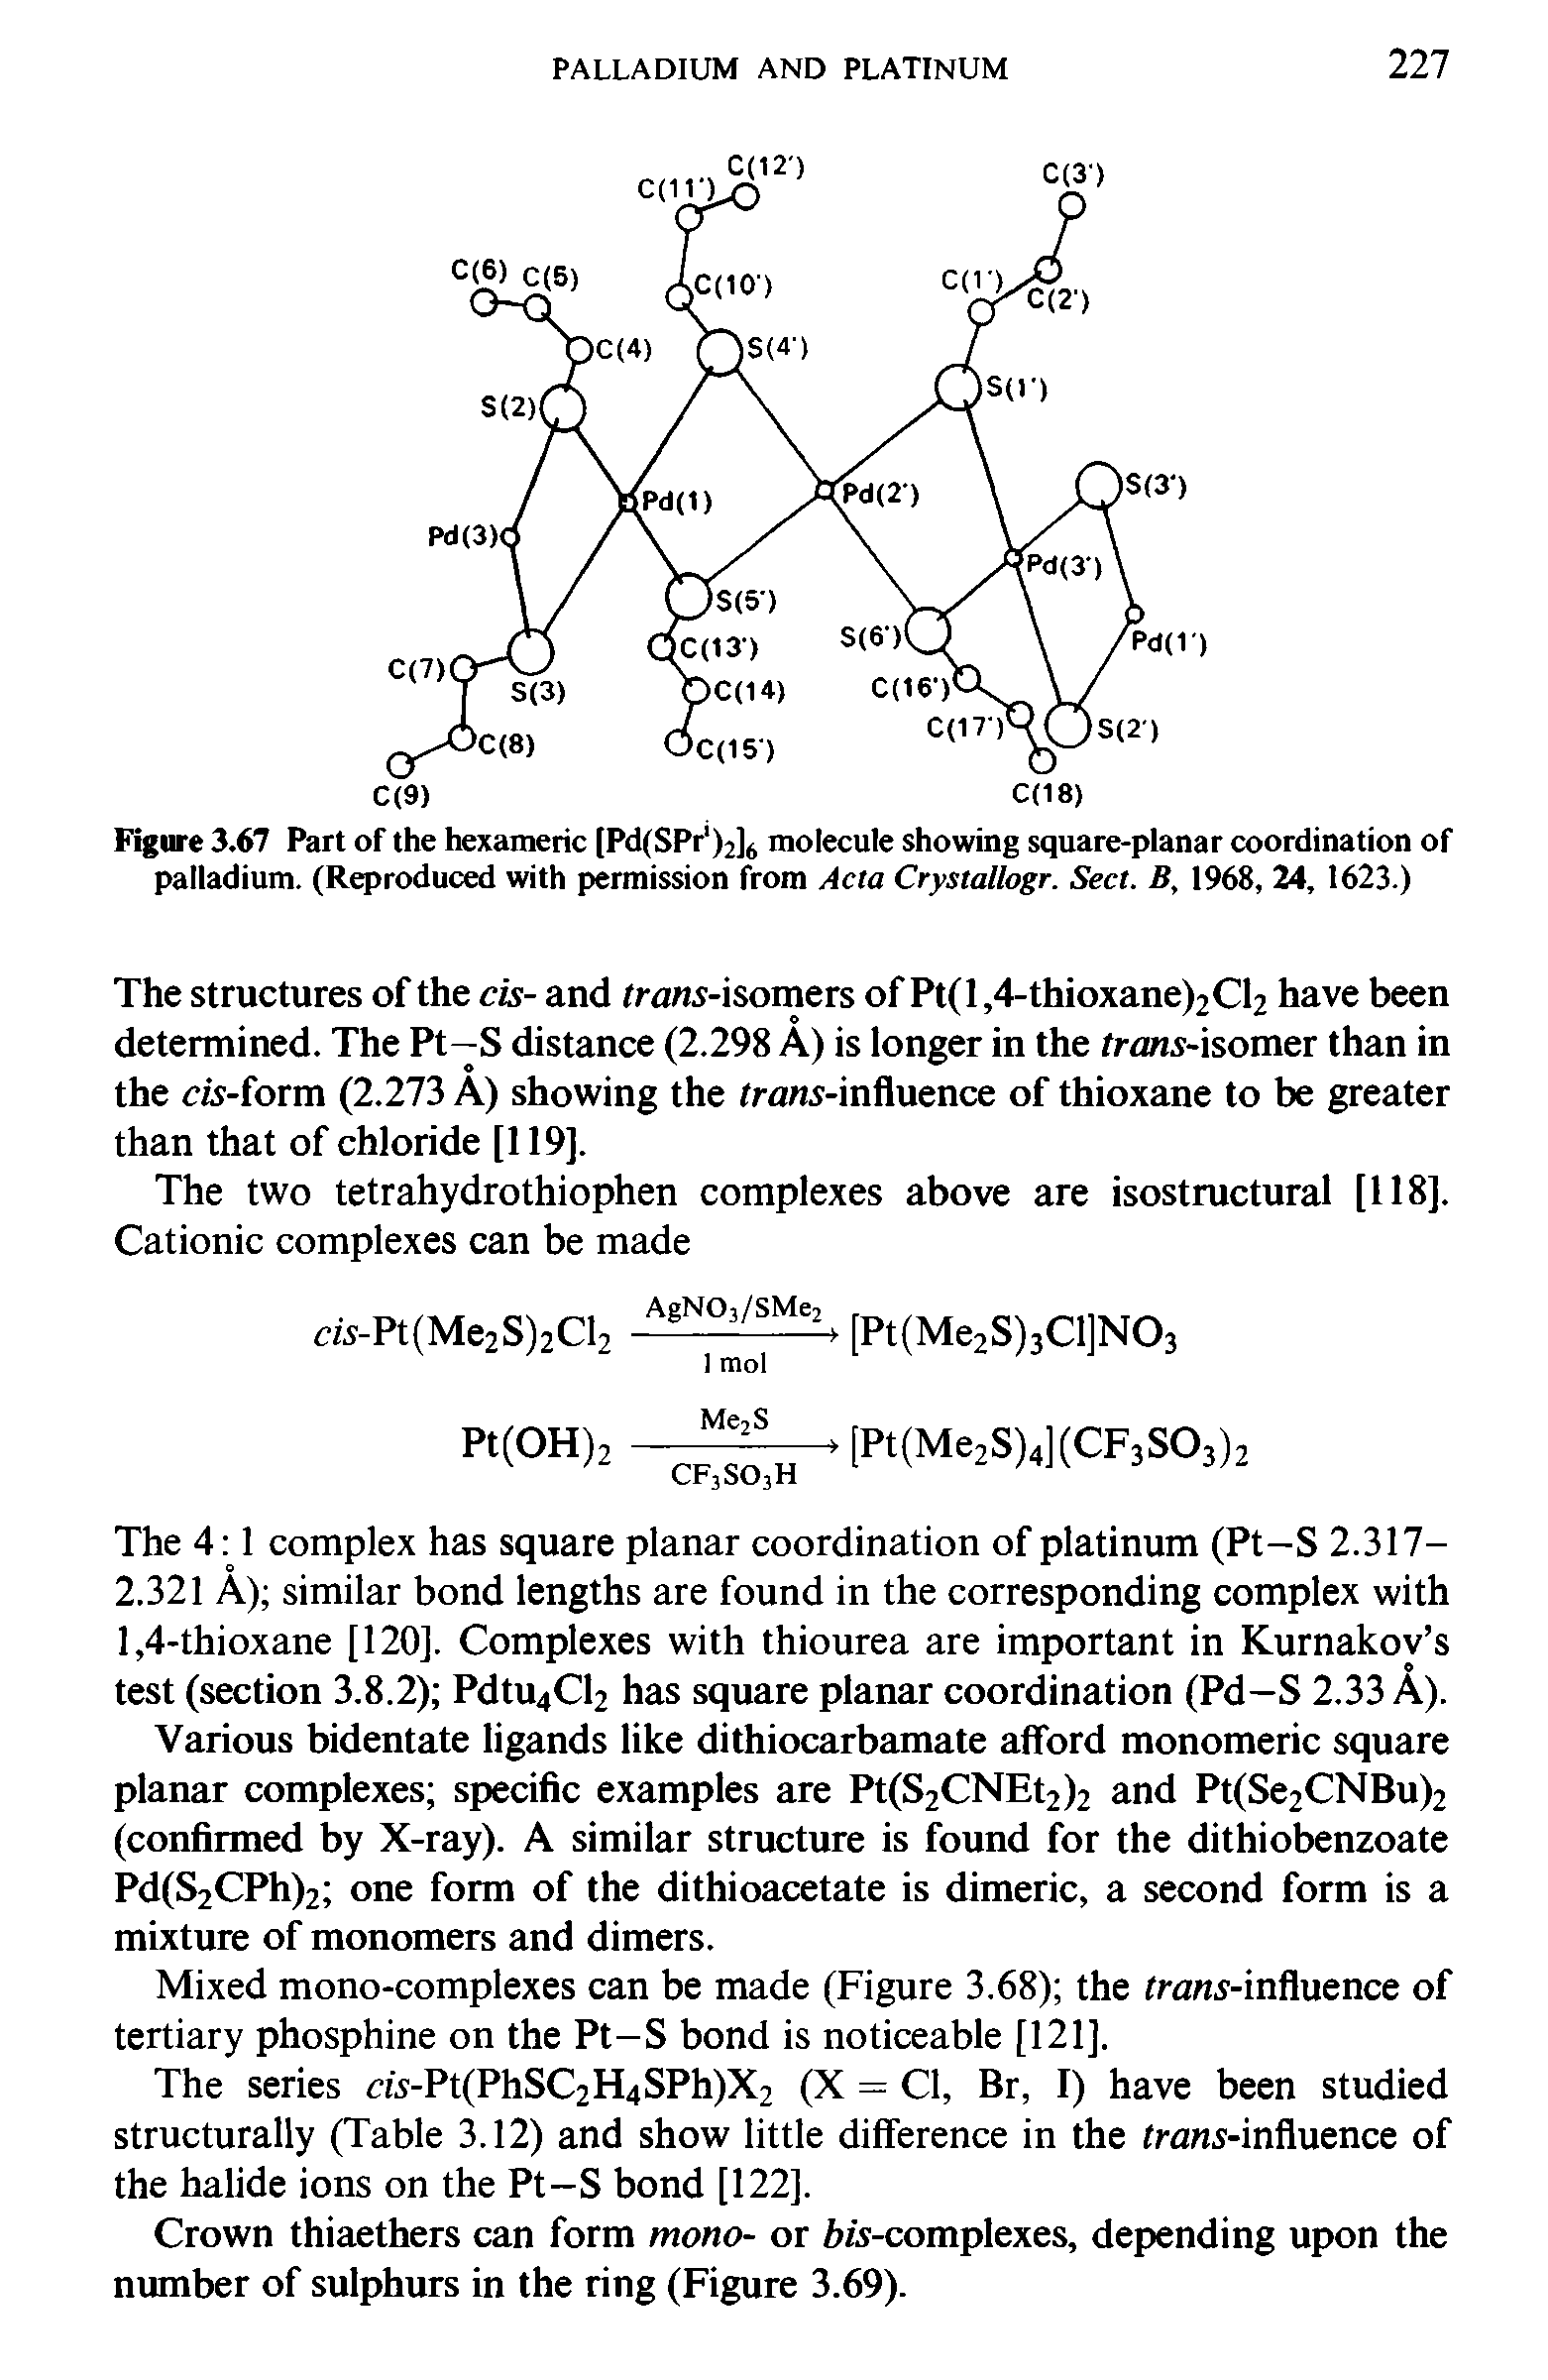 Figure 3.67 Part of the hexameric [Pd(SPr )2]6 molecule showing square-planar coordination of palladium. (Reproduced with permission from Acta Crystallogr. Sect. B, 1968, 24, 1623.)...